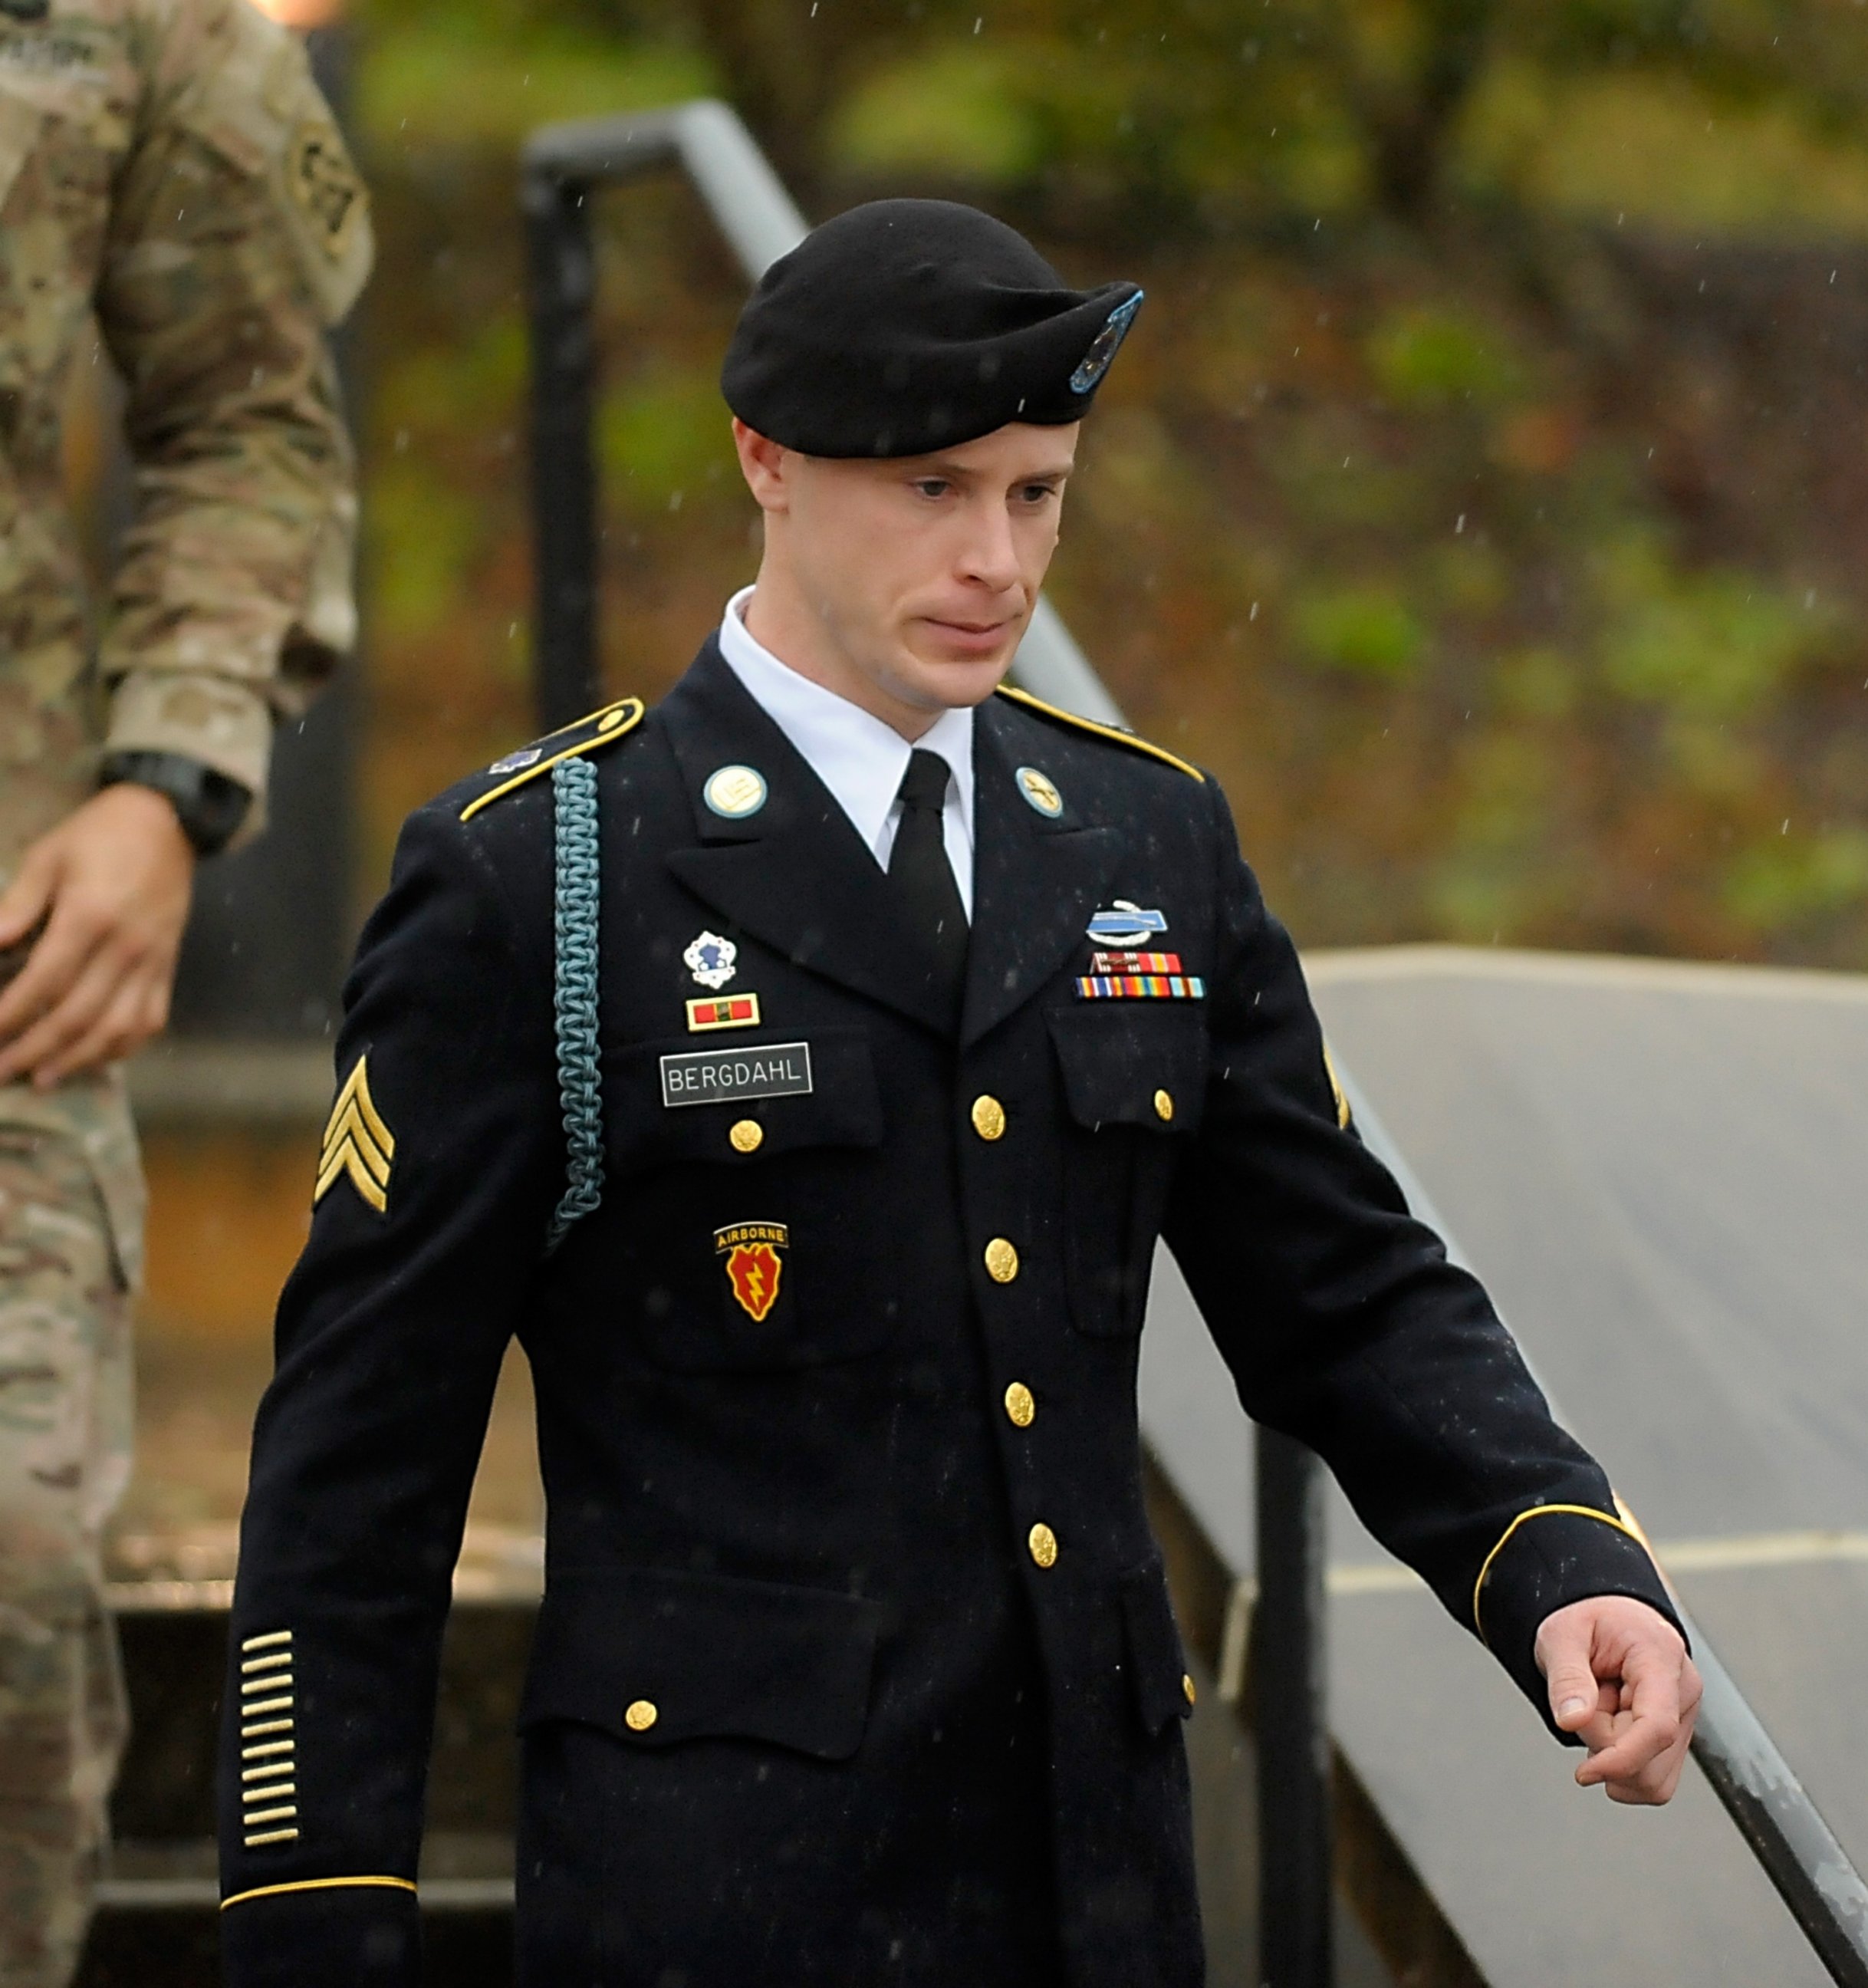 PHOTO: Army Sgt. Bowe Bergdahl leaves a military courthouse, Dec. 22, 2015, in Ft. Bragg, N.C.